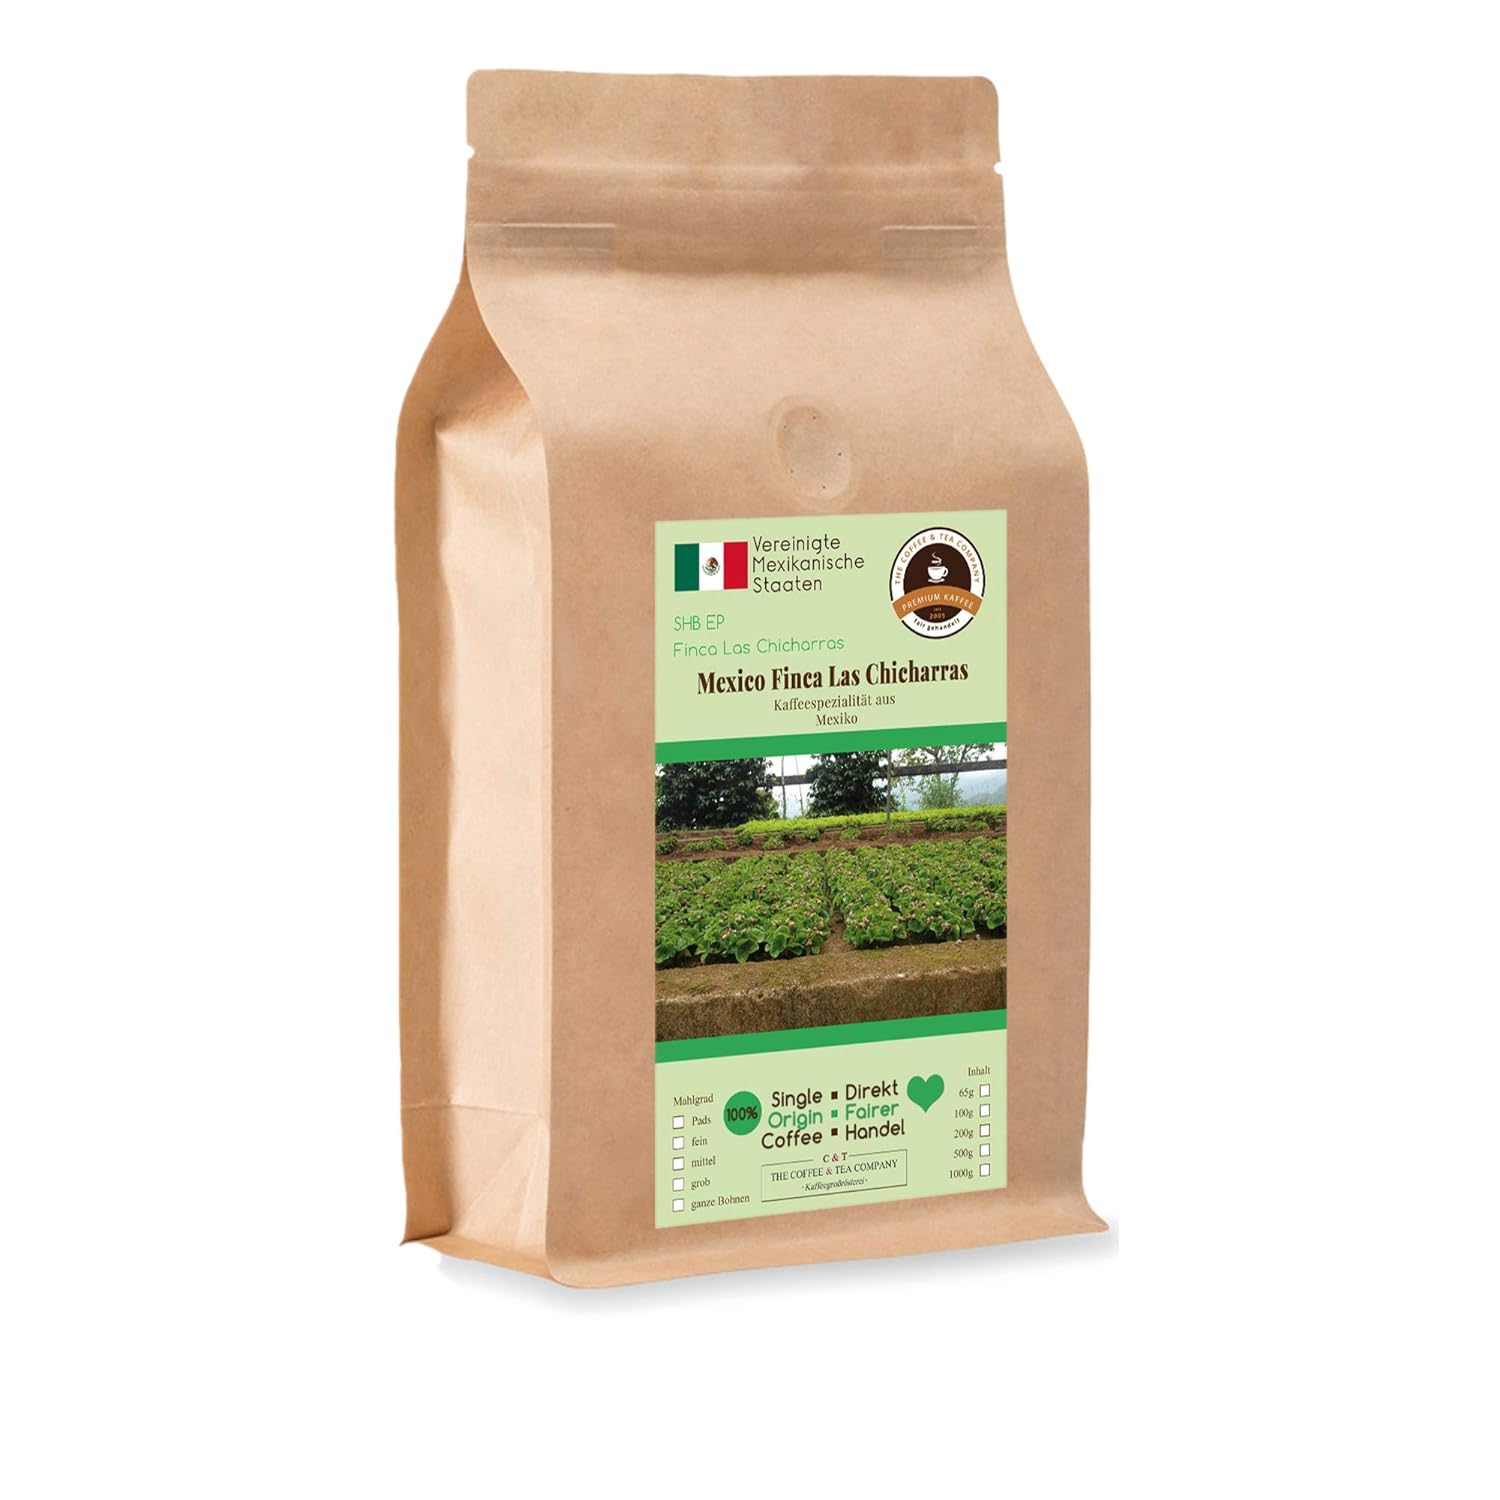 Coffee Globetrotter - Coffee with Heart - Mexico Finca Las Chicharras - 500 g Coarse Ground - for Stamp Jug French Press Coffee Maker - Top Coffee Fair Trade Supports Social Projects